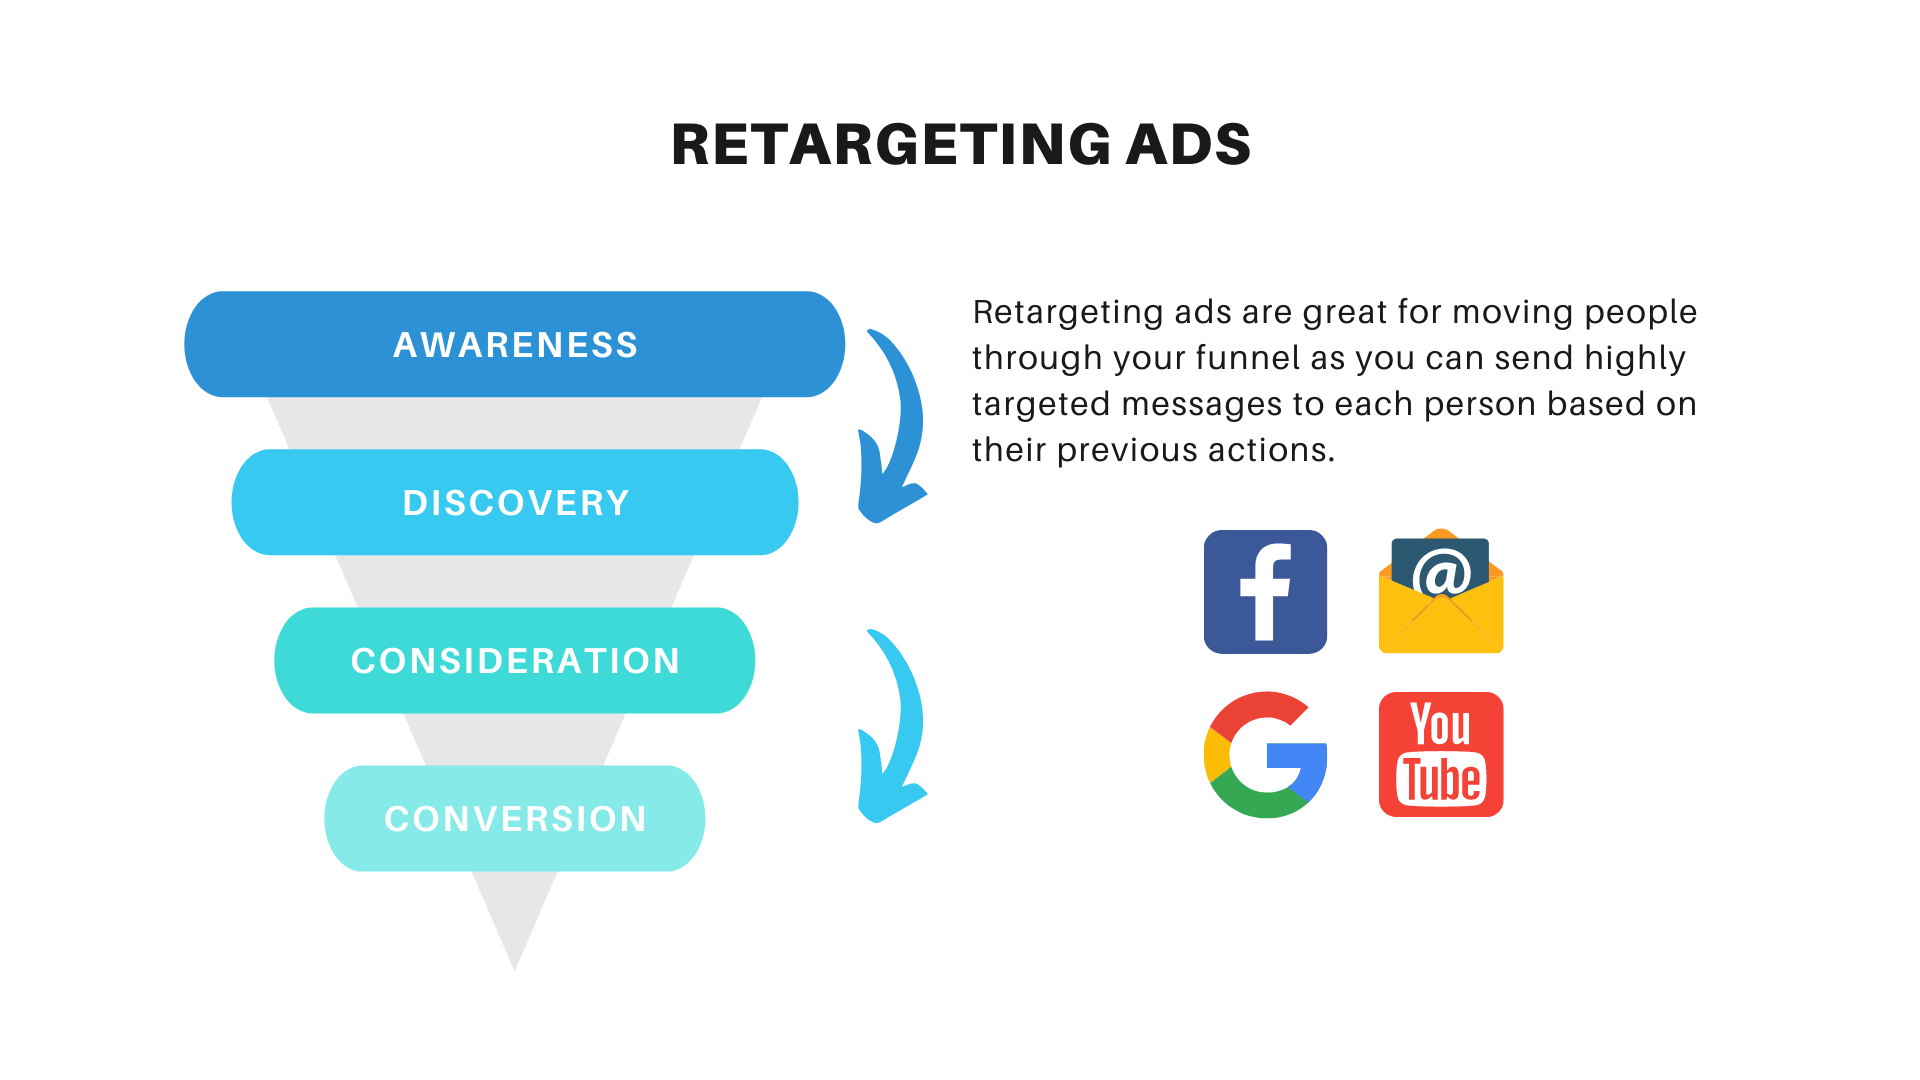 Use retargeting ads to drive more conversions